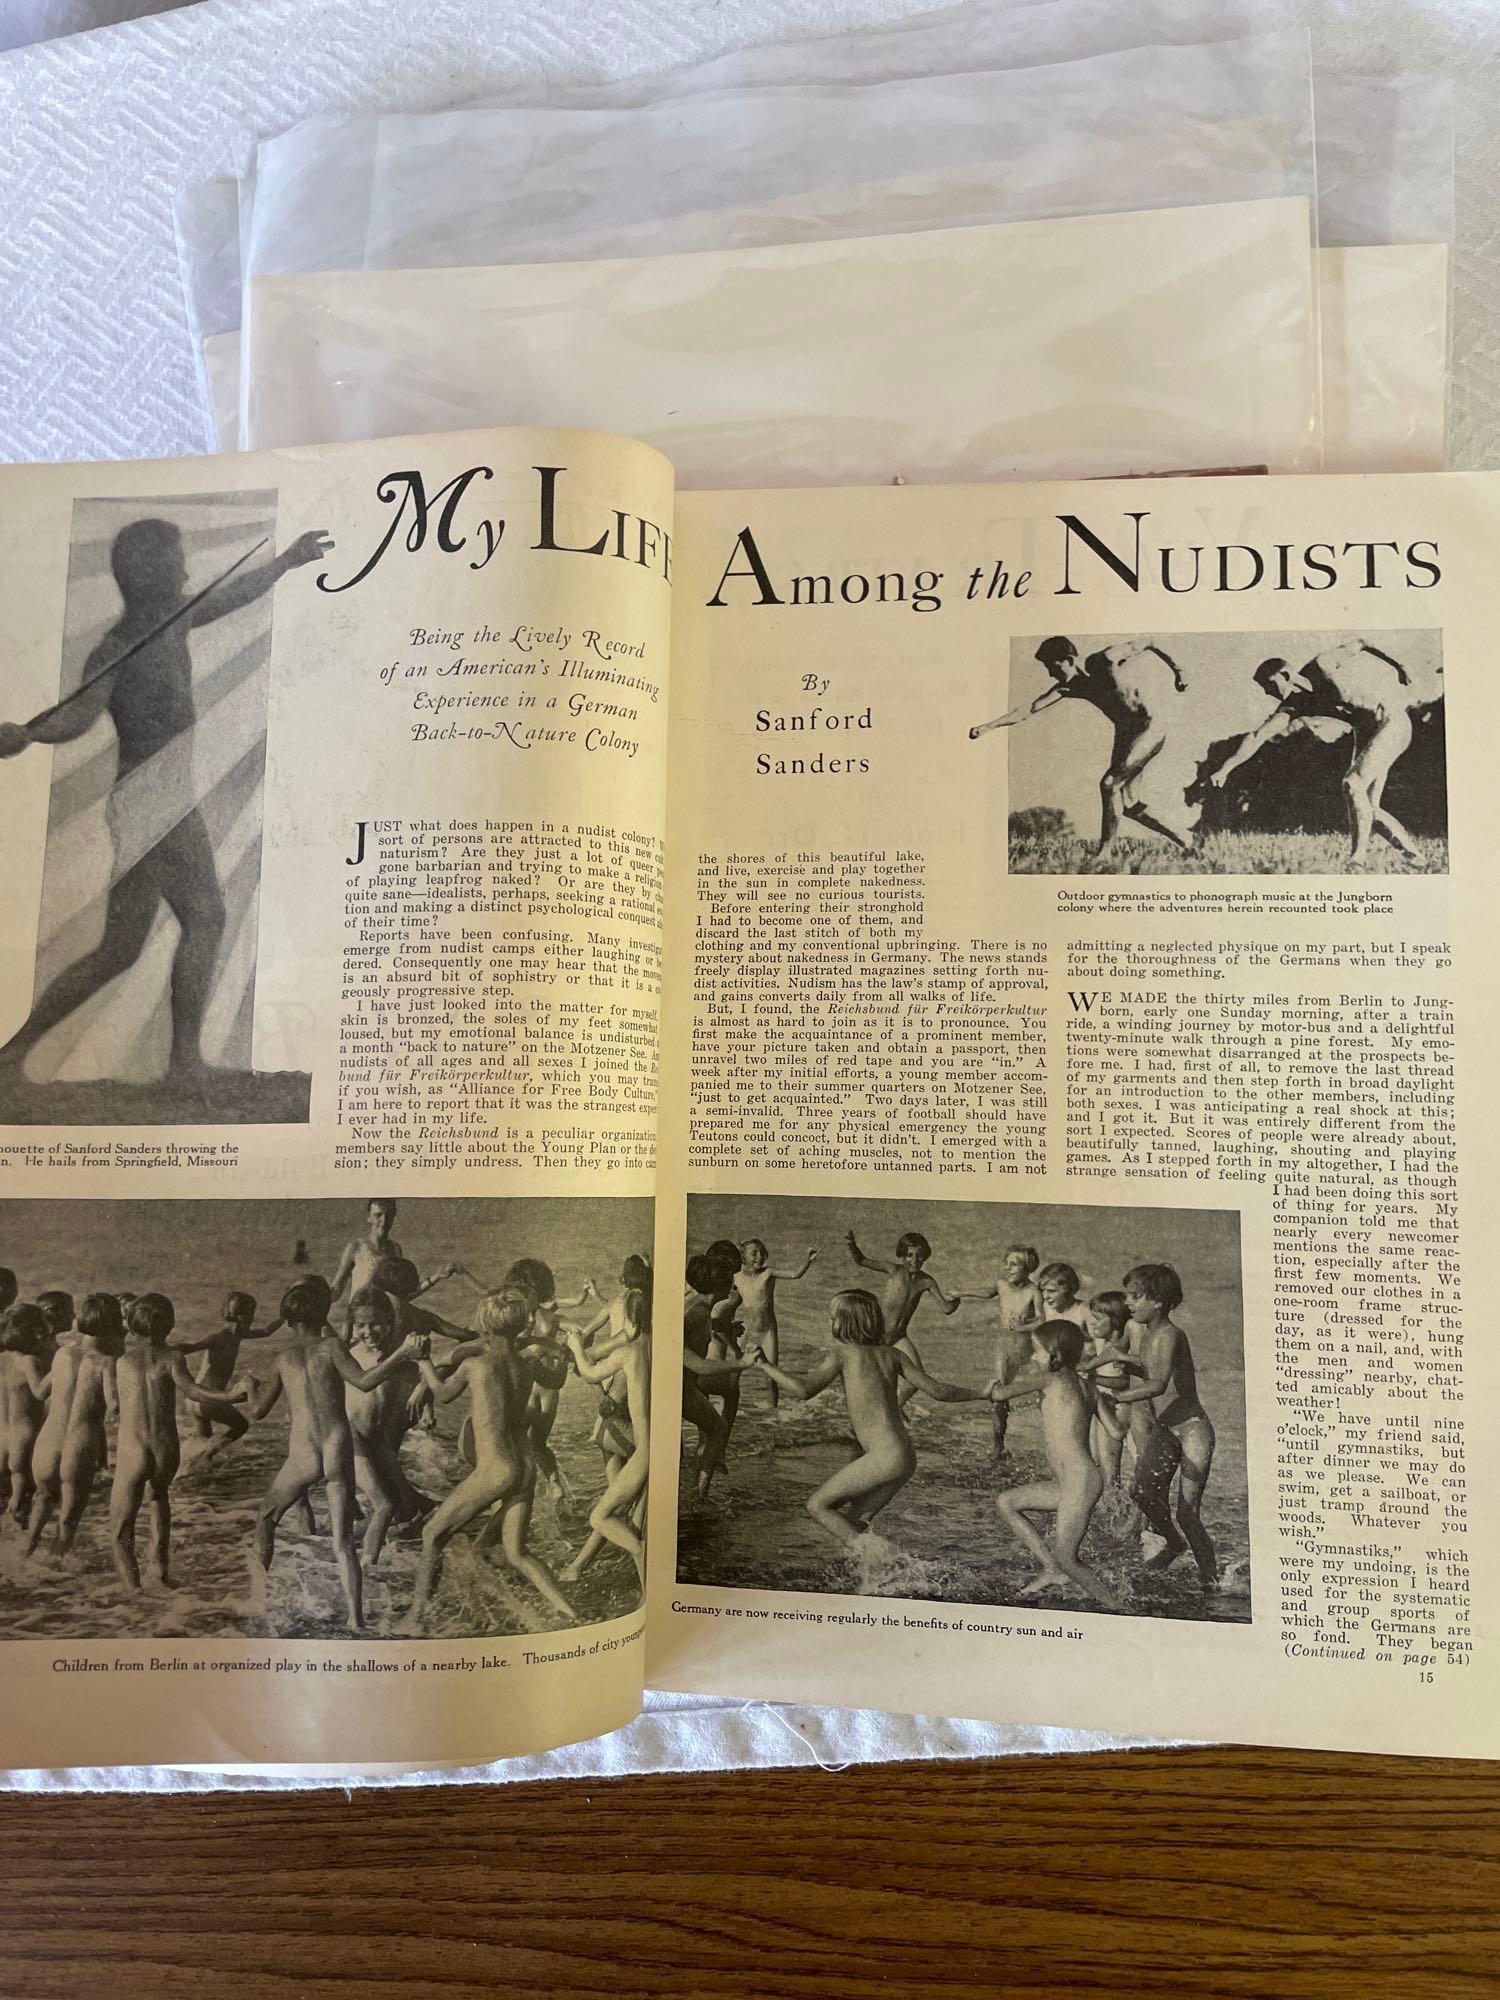 1930s Physical Culture Magazines (3)